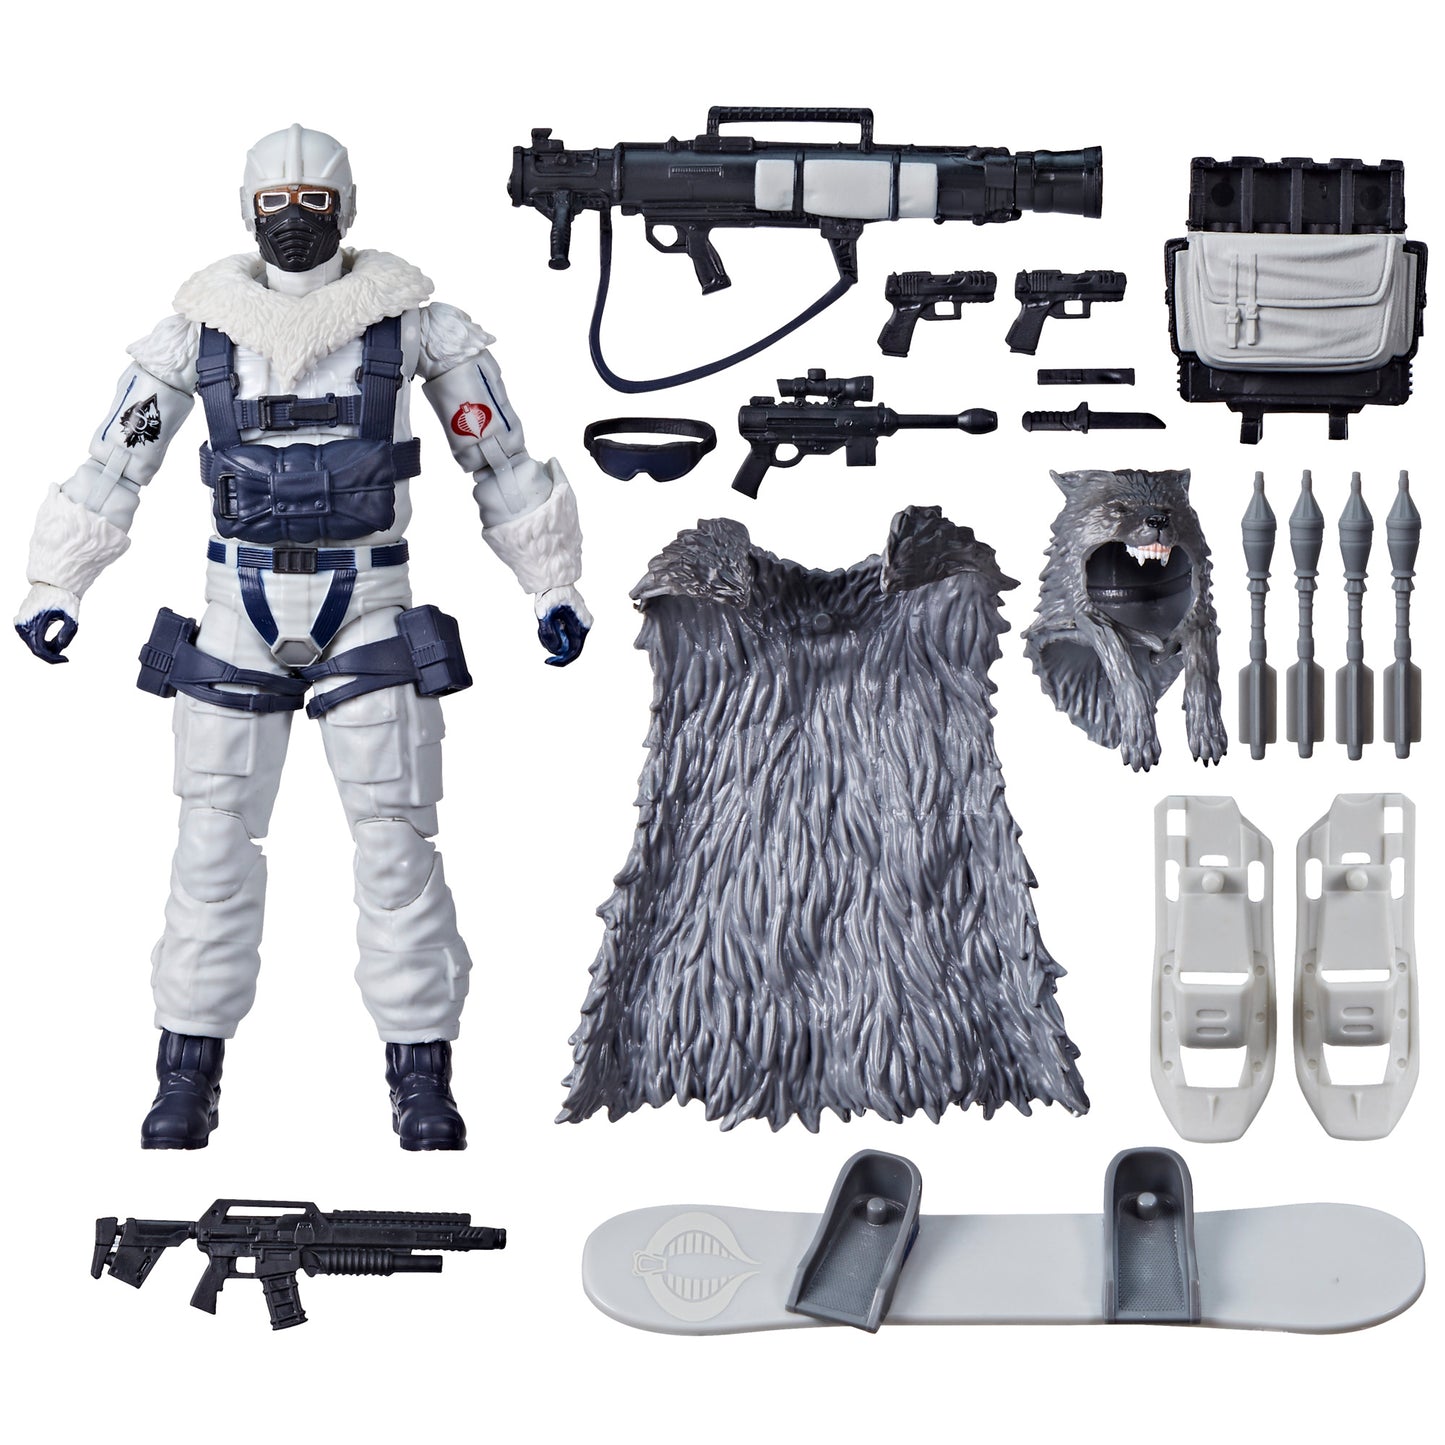 G.I. Joe Classified Series Snow Serpent, 93 Action Figure Toy